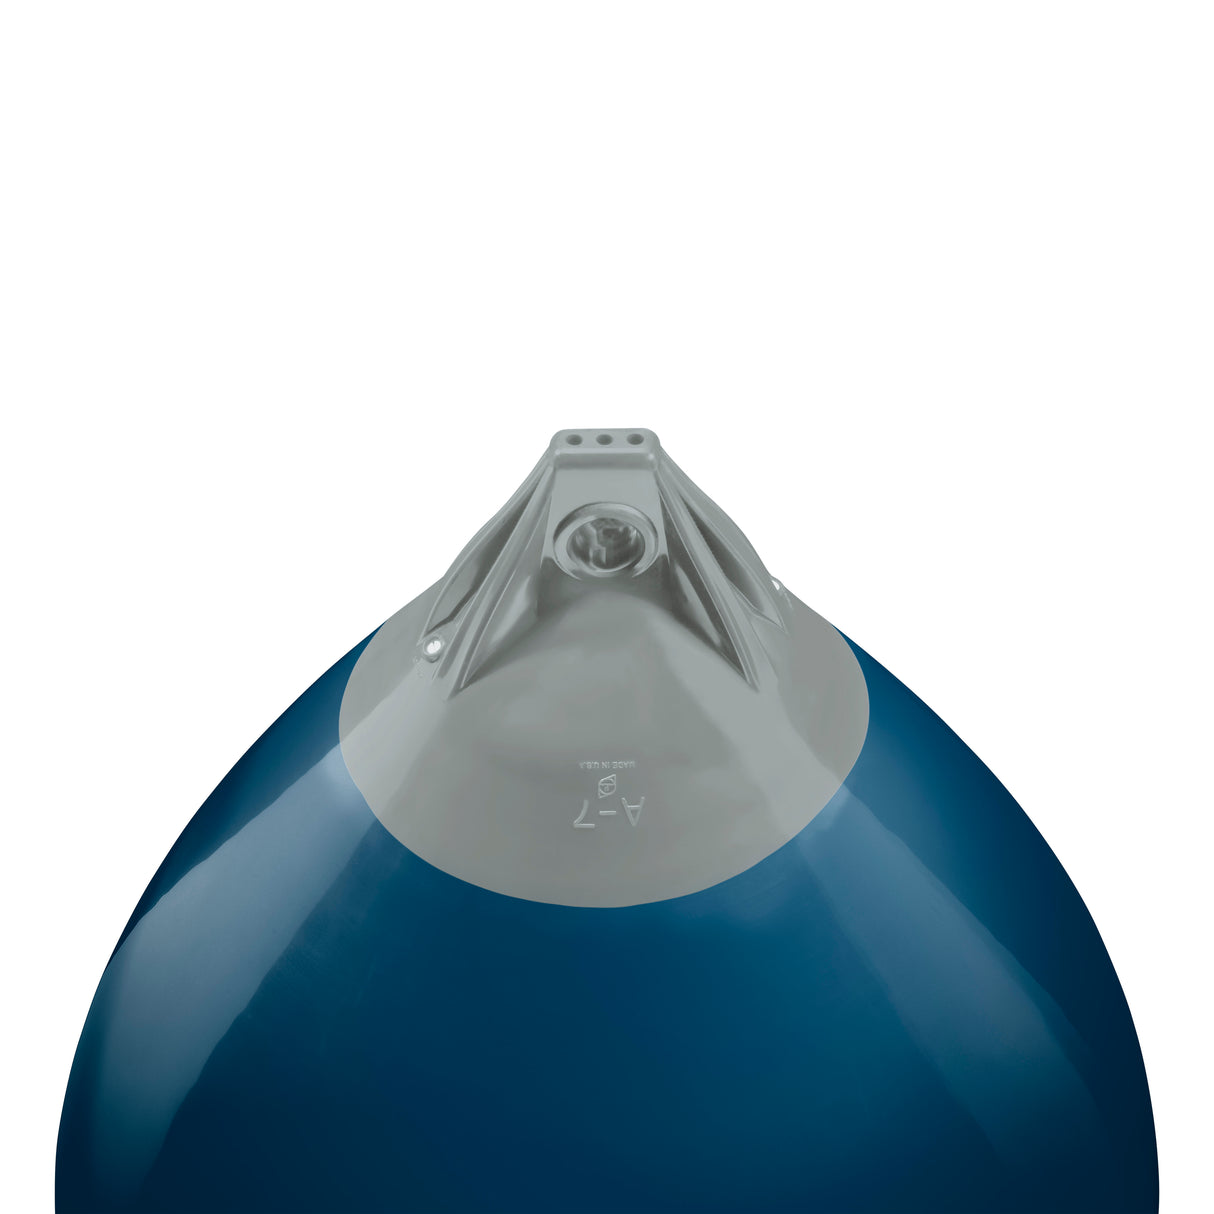 Catalina Blue buoy with Grey-Top, Polyform A-7 angled shot